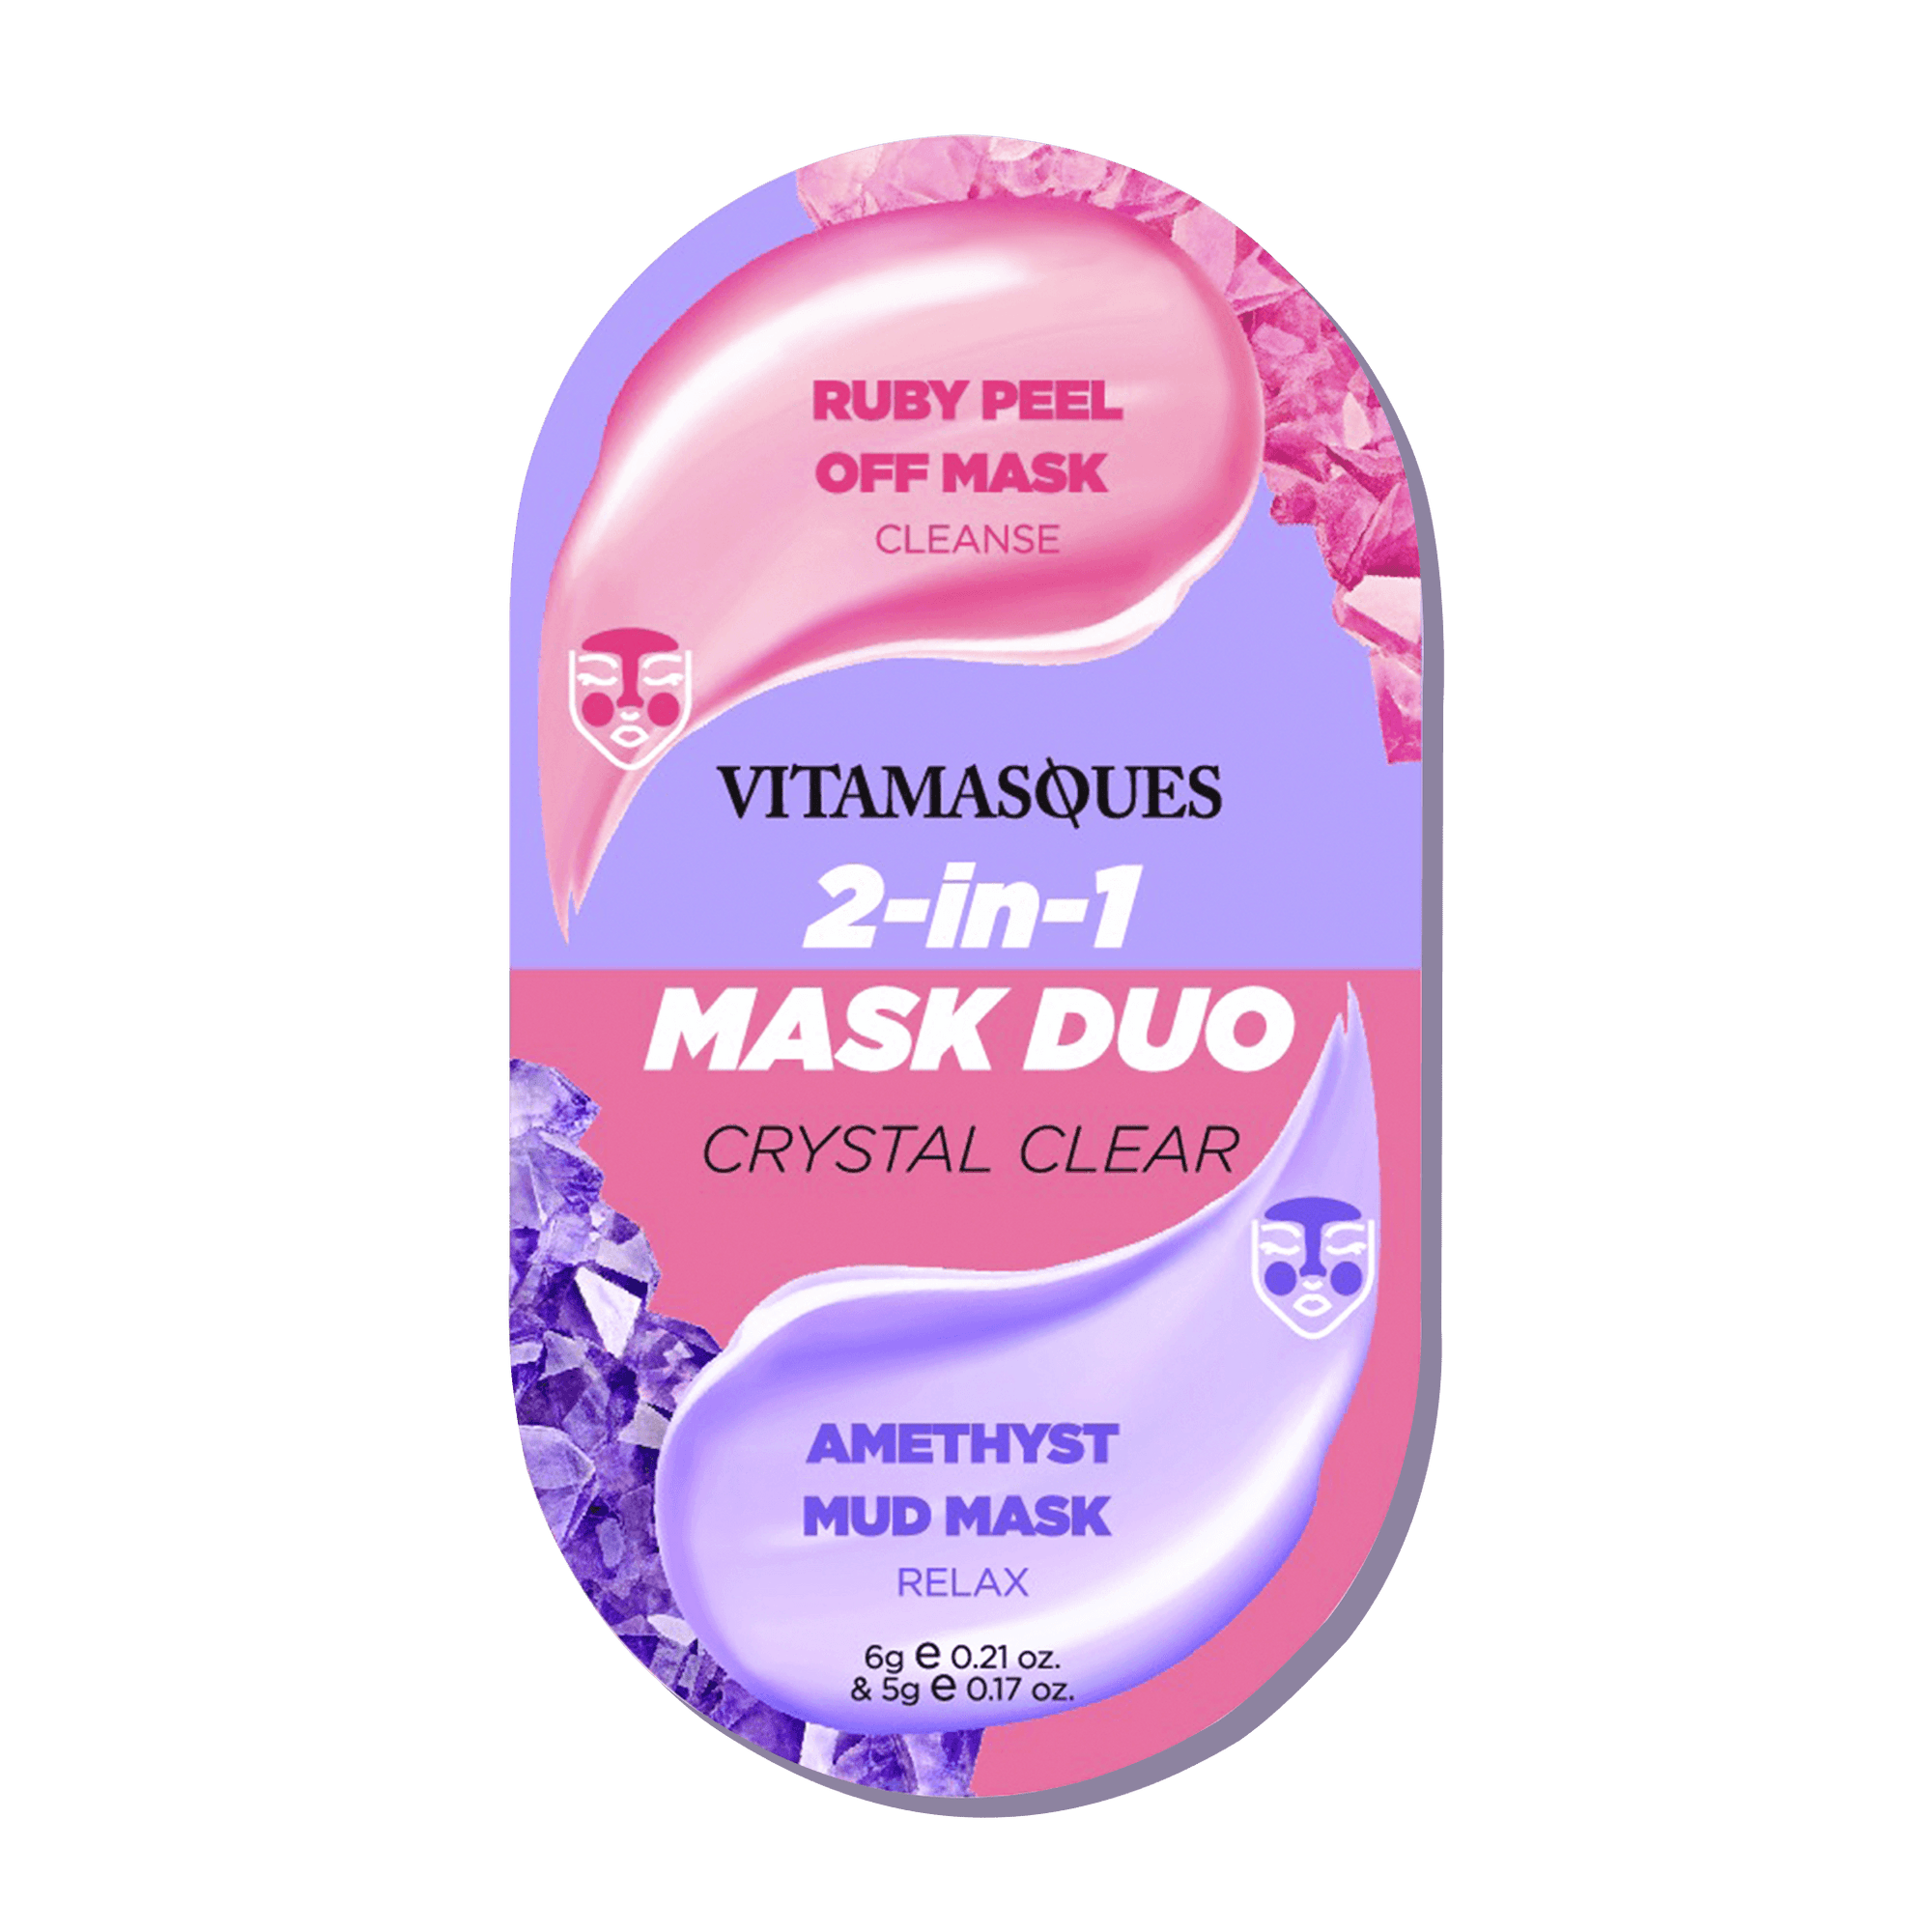 2-in-1 Mask Duo: Crystal Clear 2-in-1 Mask - Vitamasques